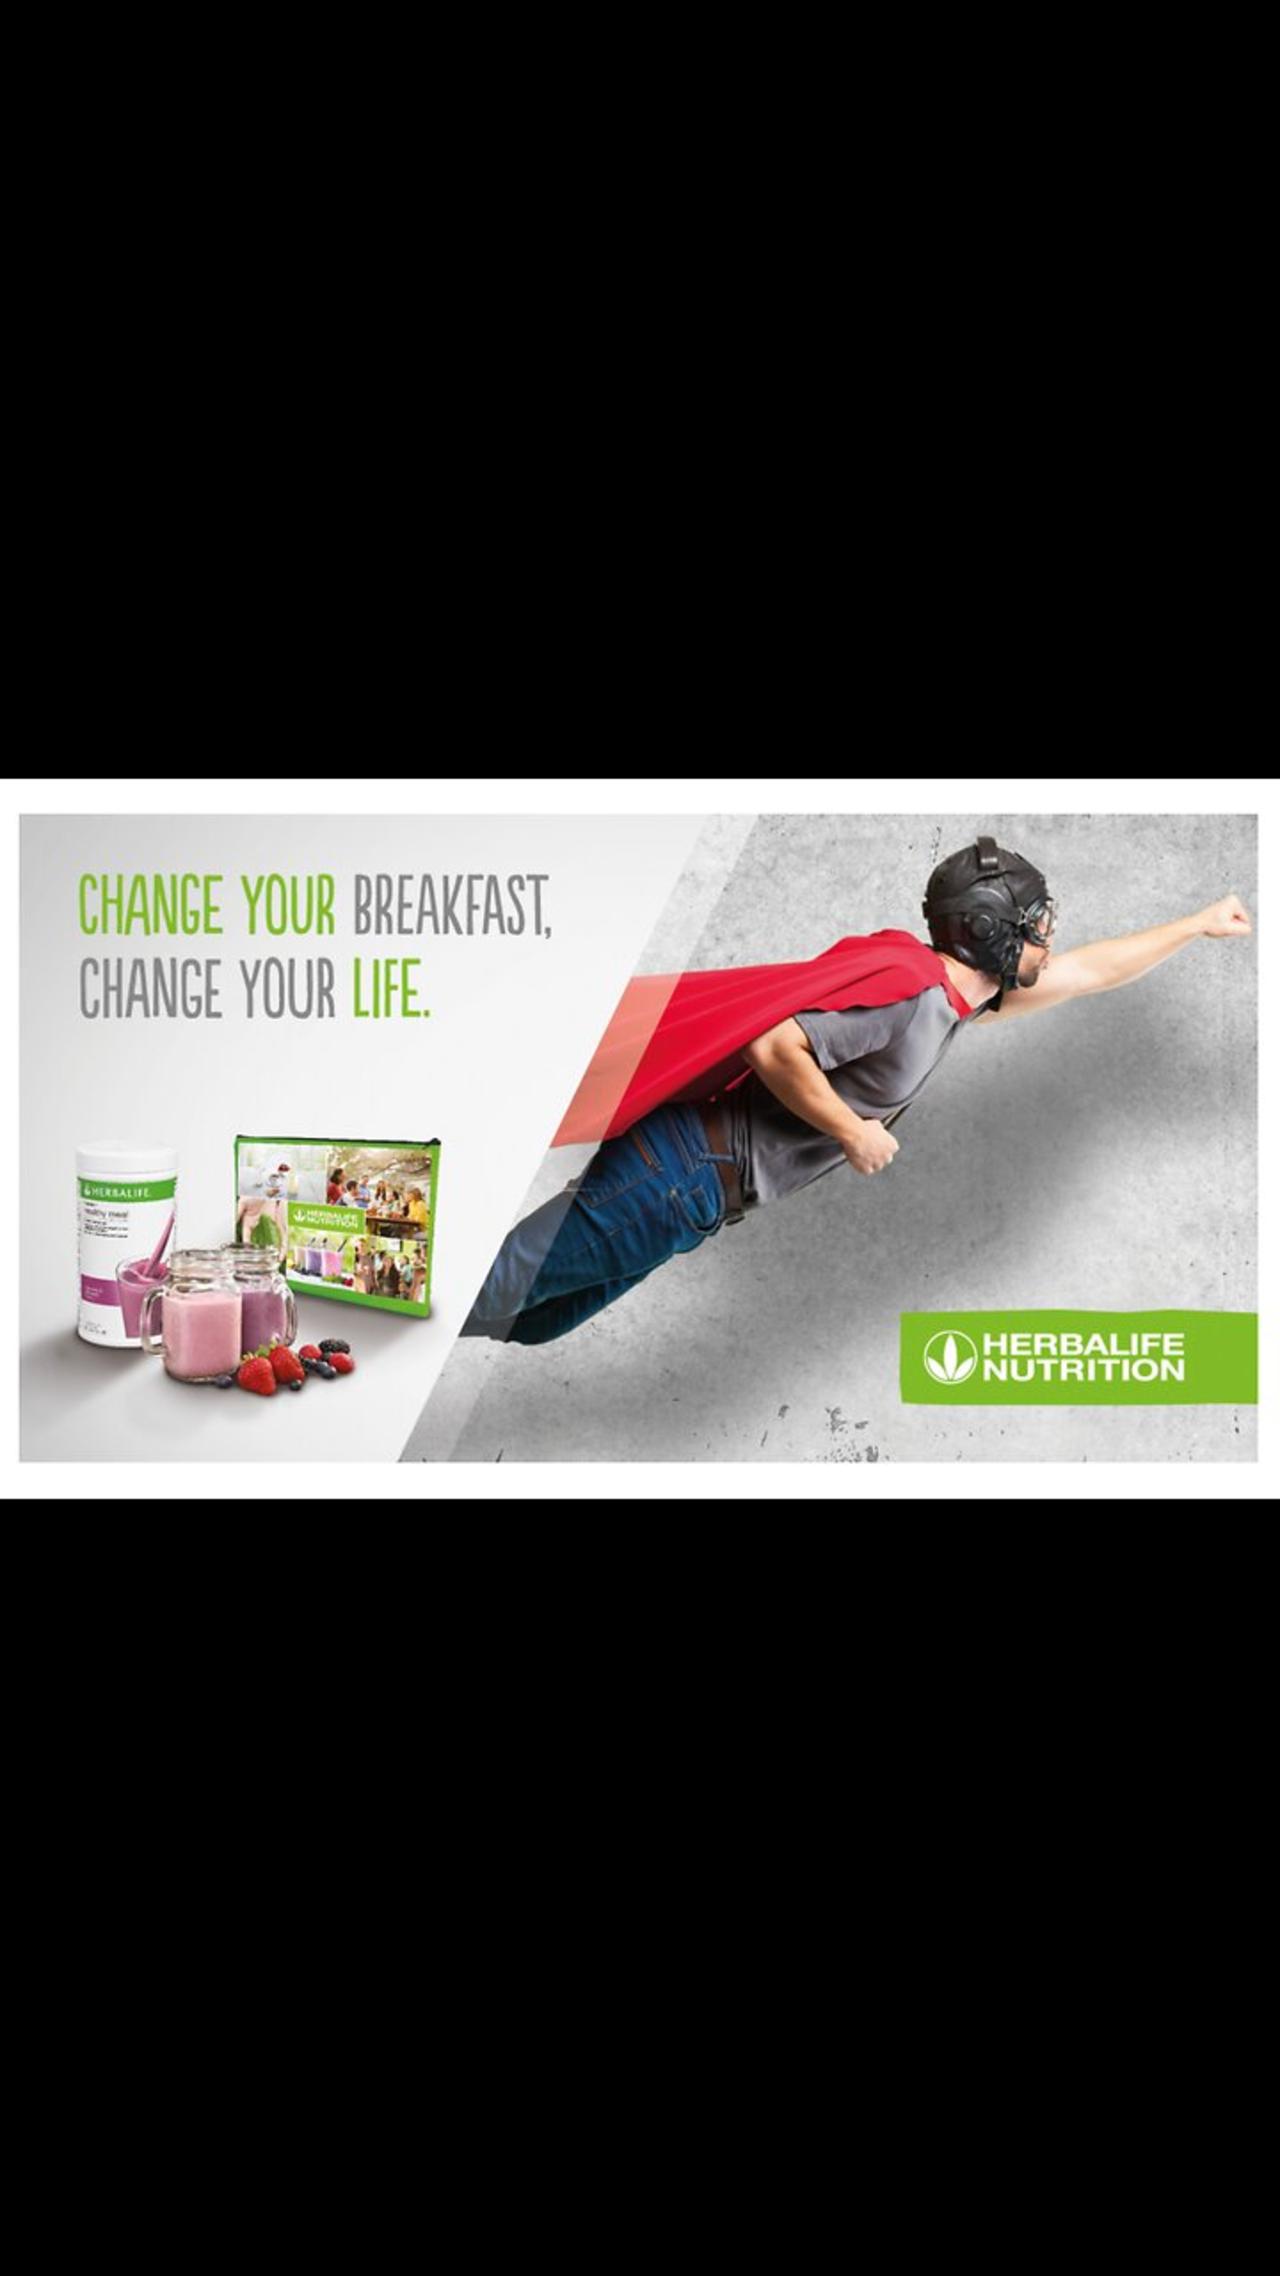 Ideal Breakfast Challenge | Herbalife Nutrition Core Products